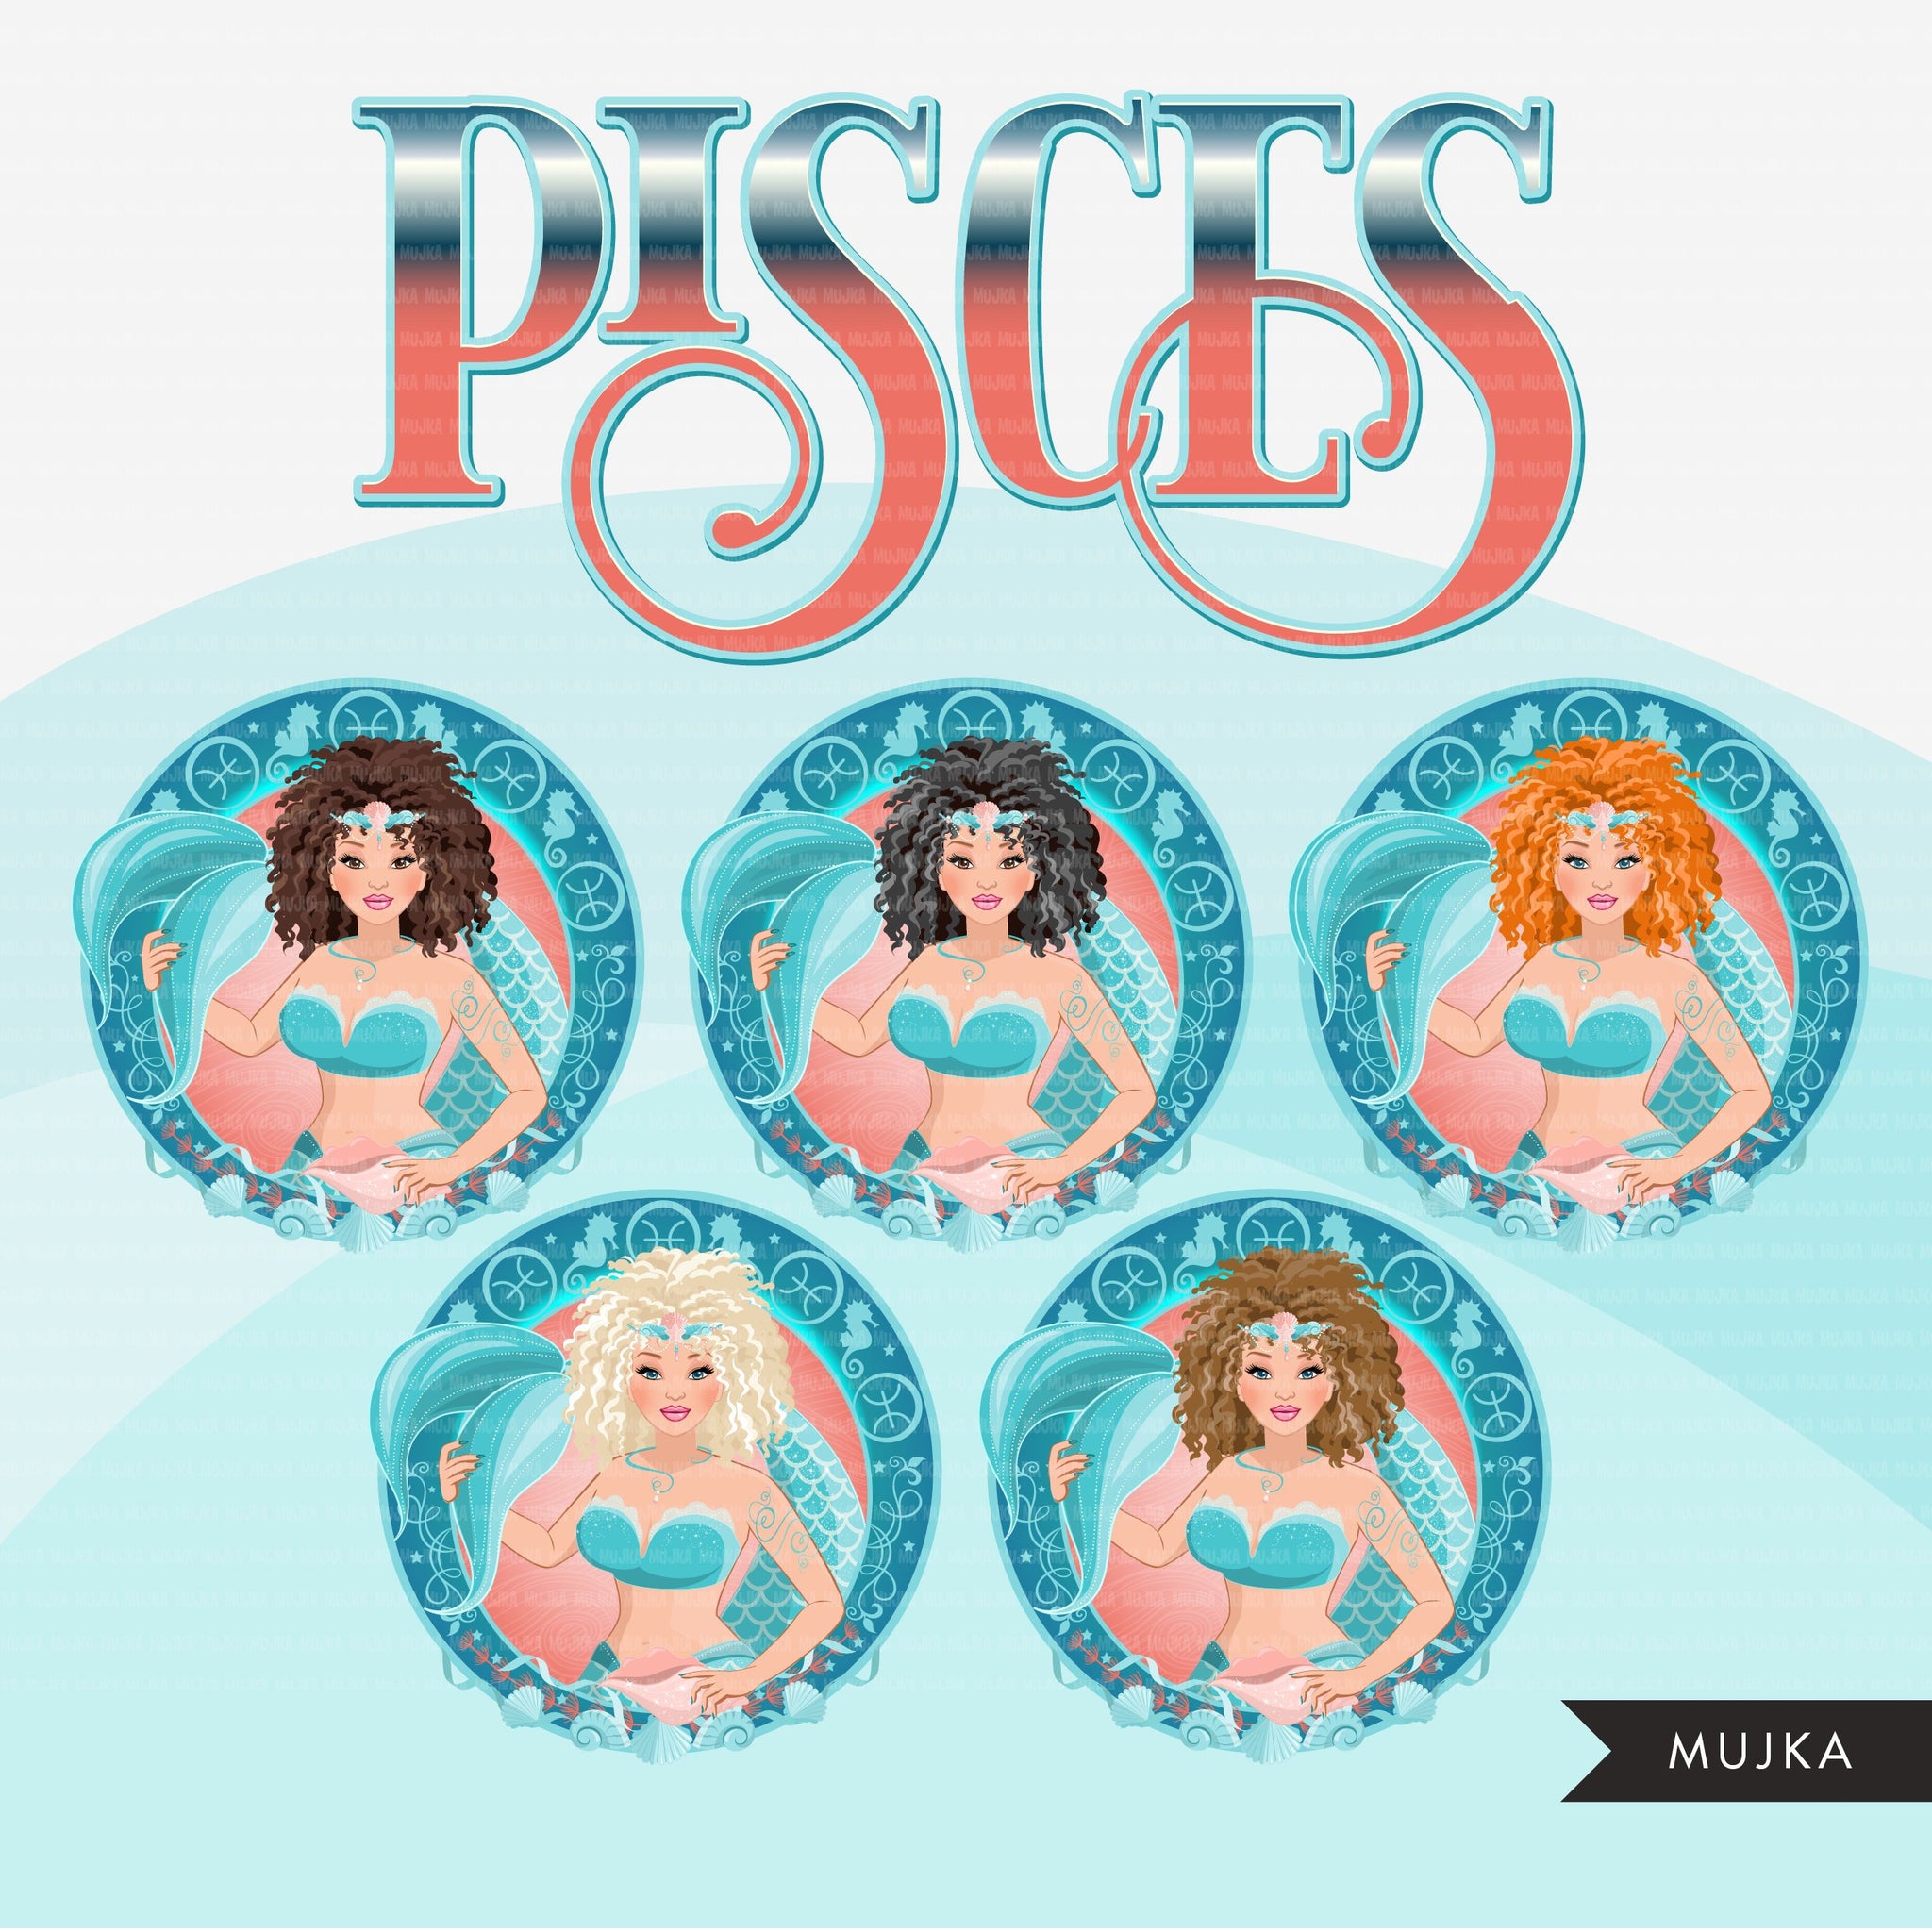 Zodiac Pisces Clipart, Png digital download, Sublimation Graphics for Cricut & Cameo, Caucasian curly hair Woman Horoscope sign designs